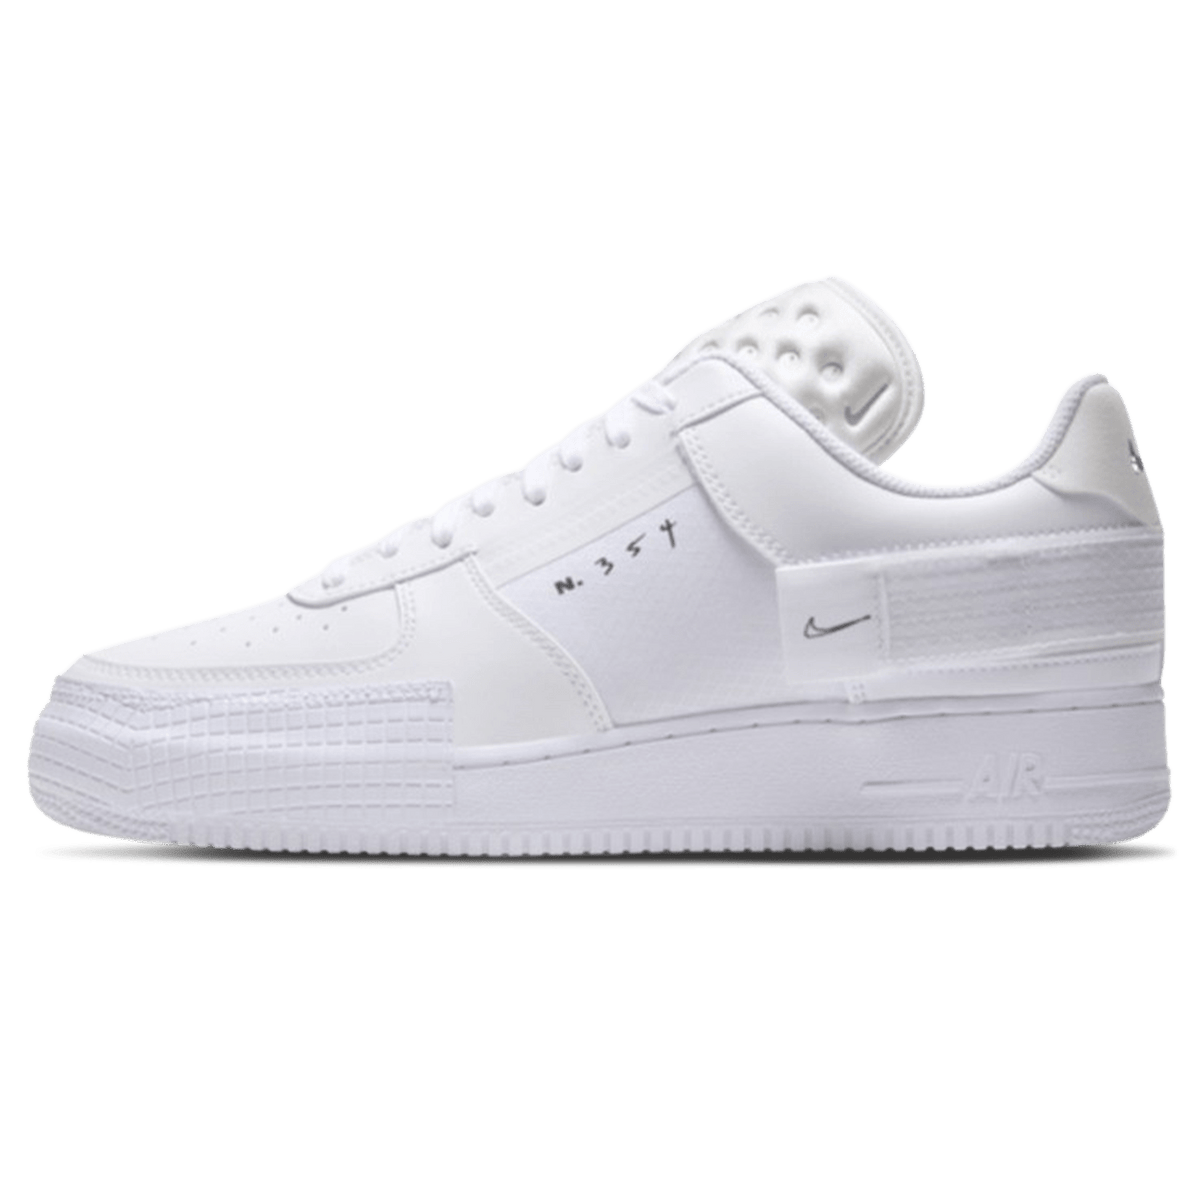 Nike Air Force 1 '07 Lv8 Utility Poor man's Off-white